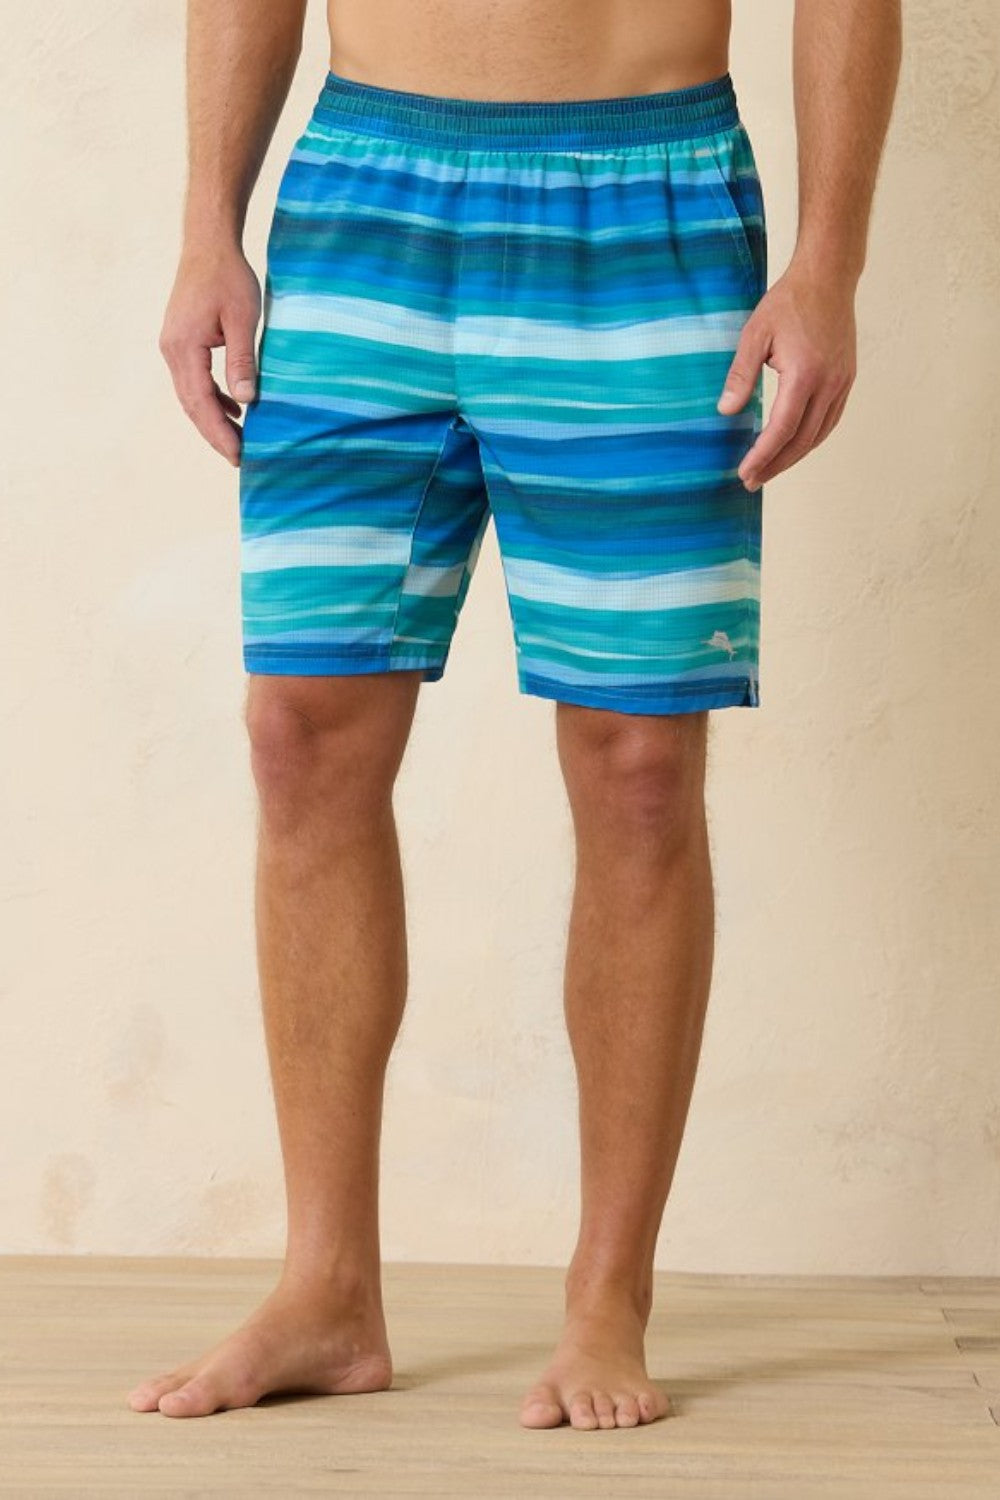 Get the best of both worlds with our Monterey Coast Hybrid Shorts. From the beach to the boardwalk, experience the comfort of this stretch-friendly swim style that's up for any kind of adventure.